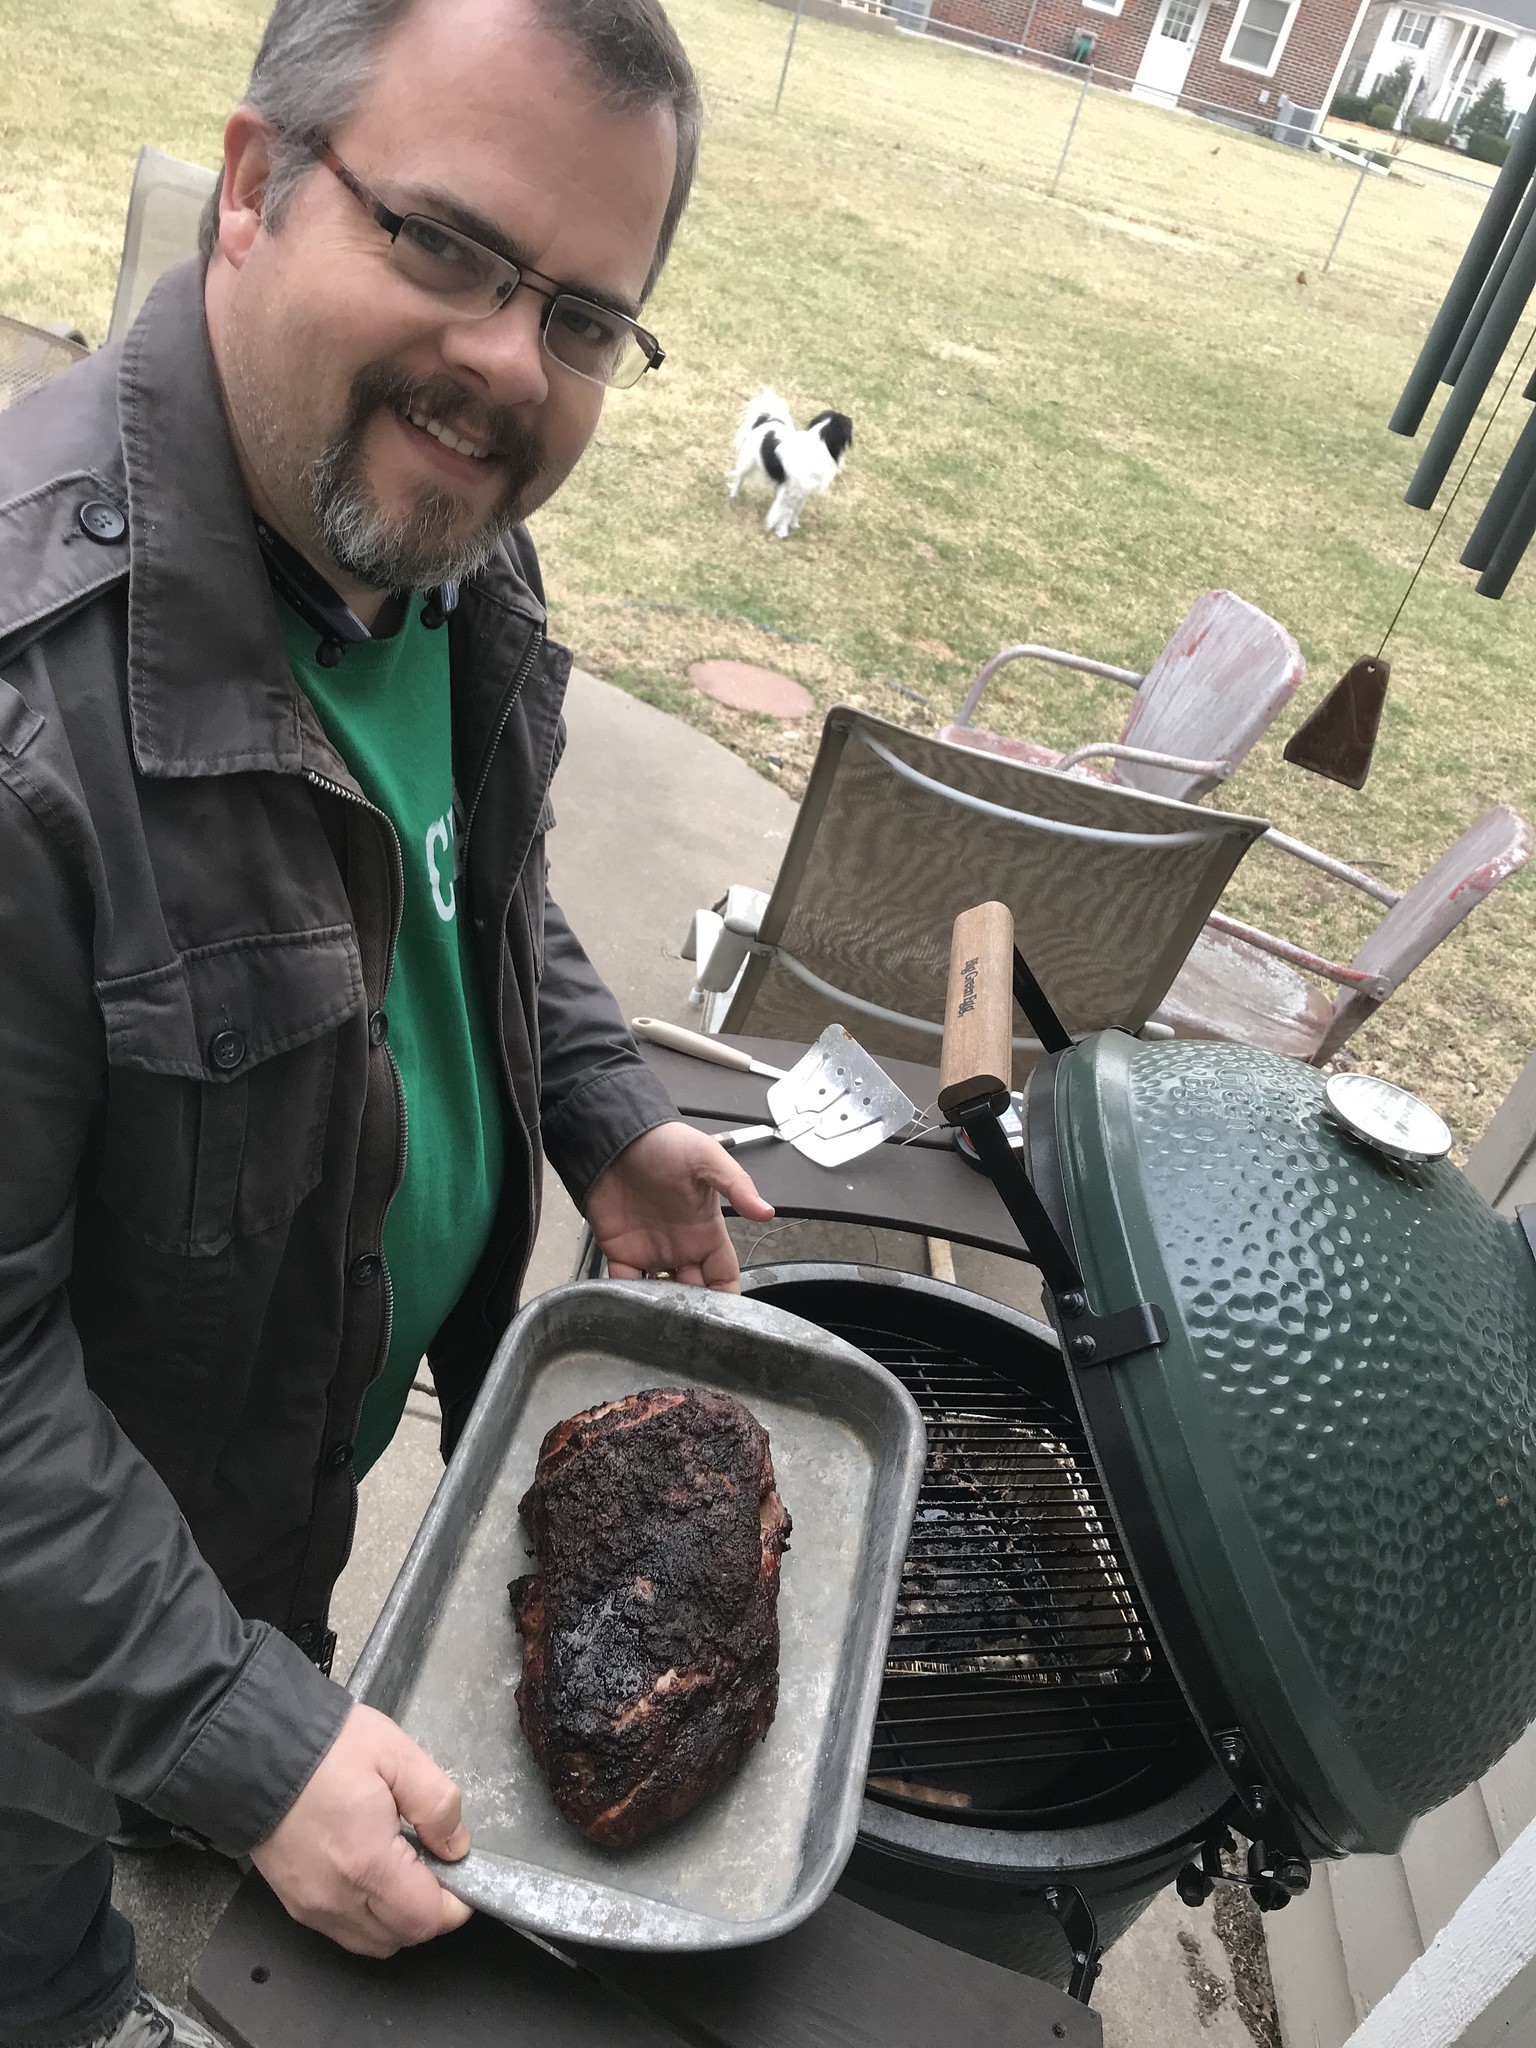 Picture of me removing the Pork Butt from the Grill